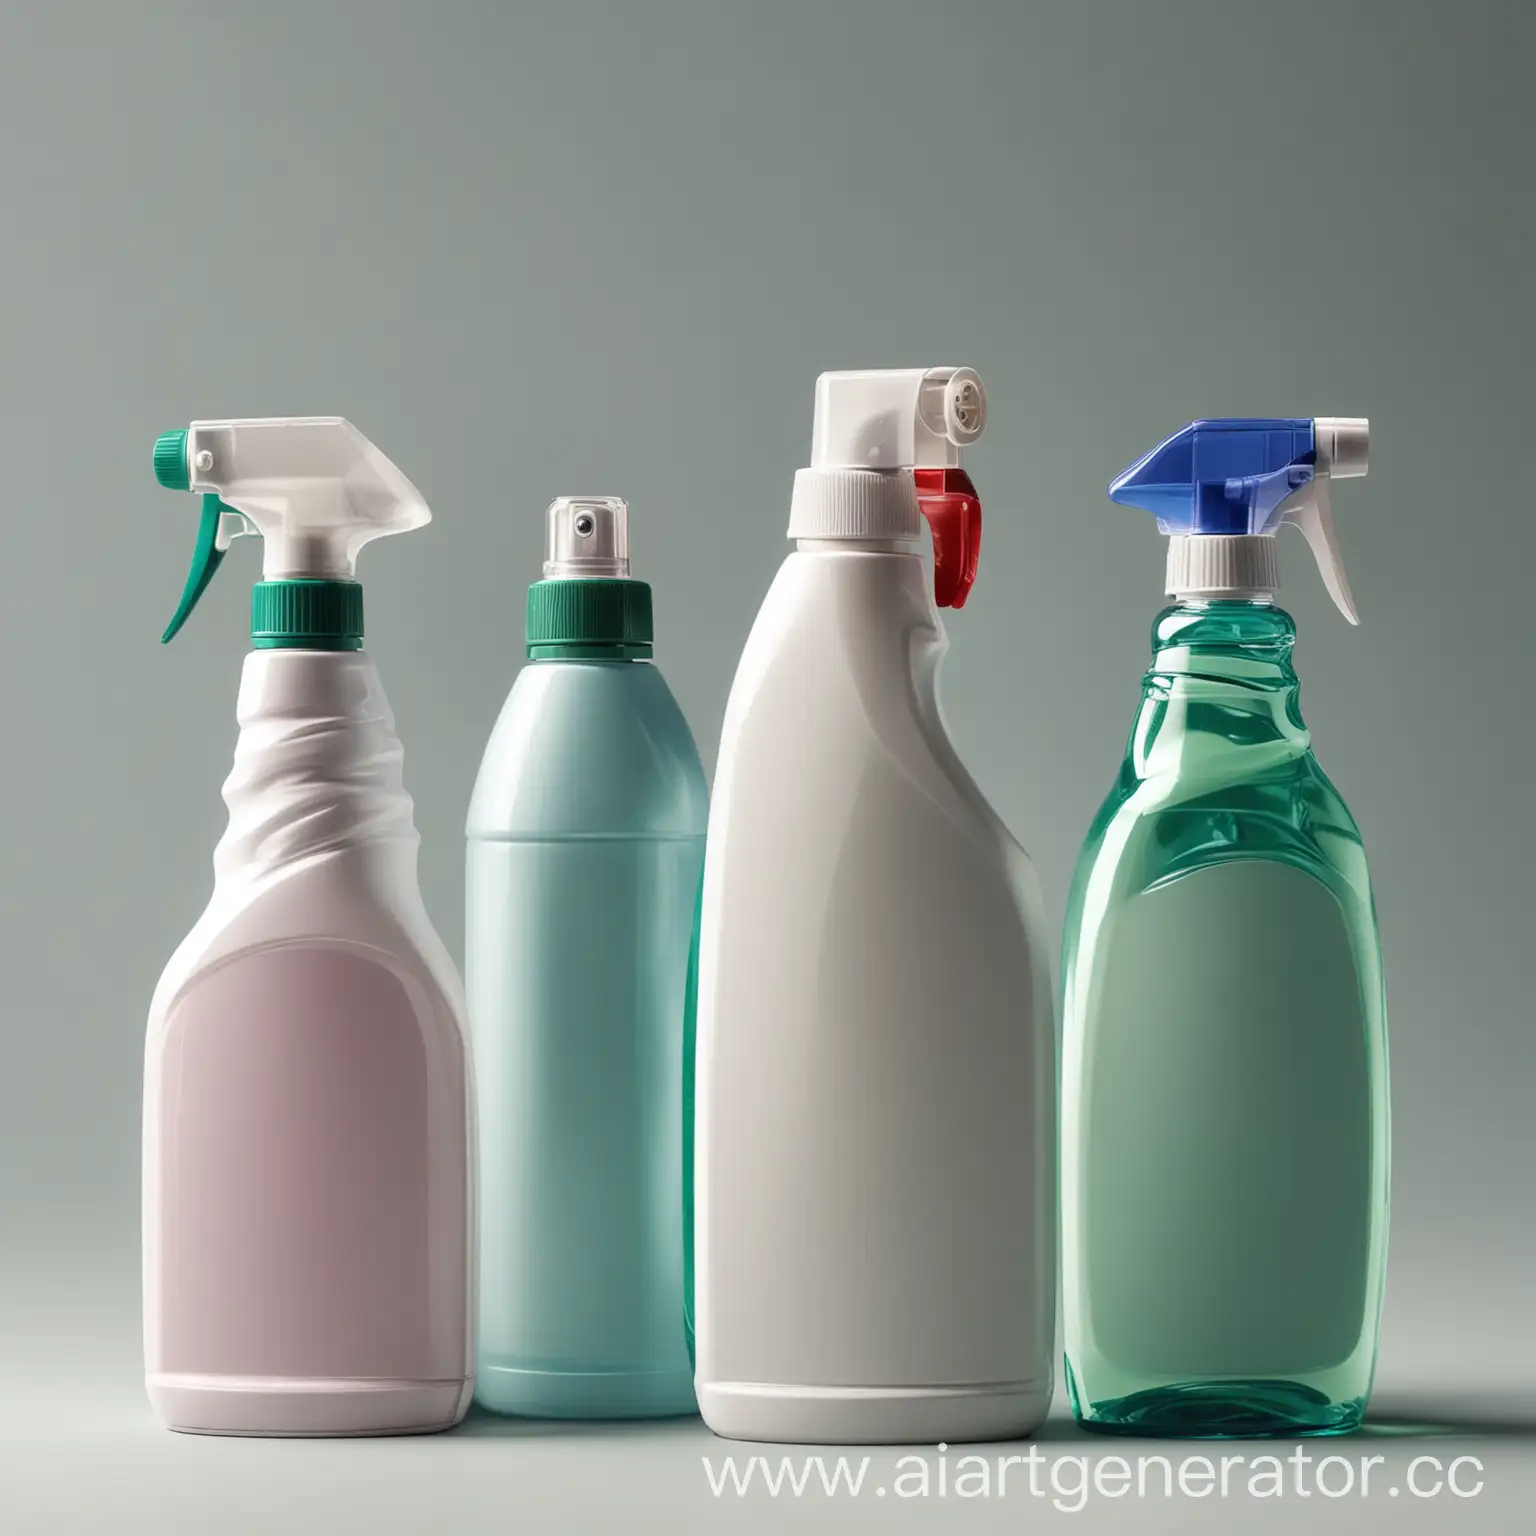 Household-Chemical-Bottles-and-Laundry-Detergents-Arrangement